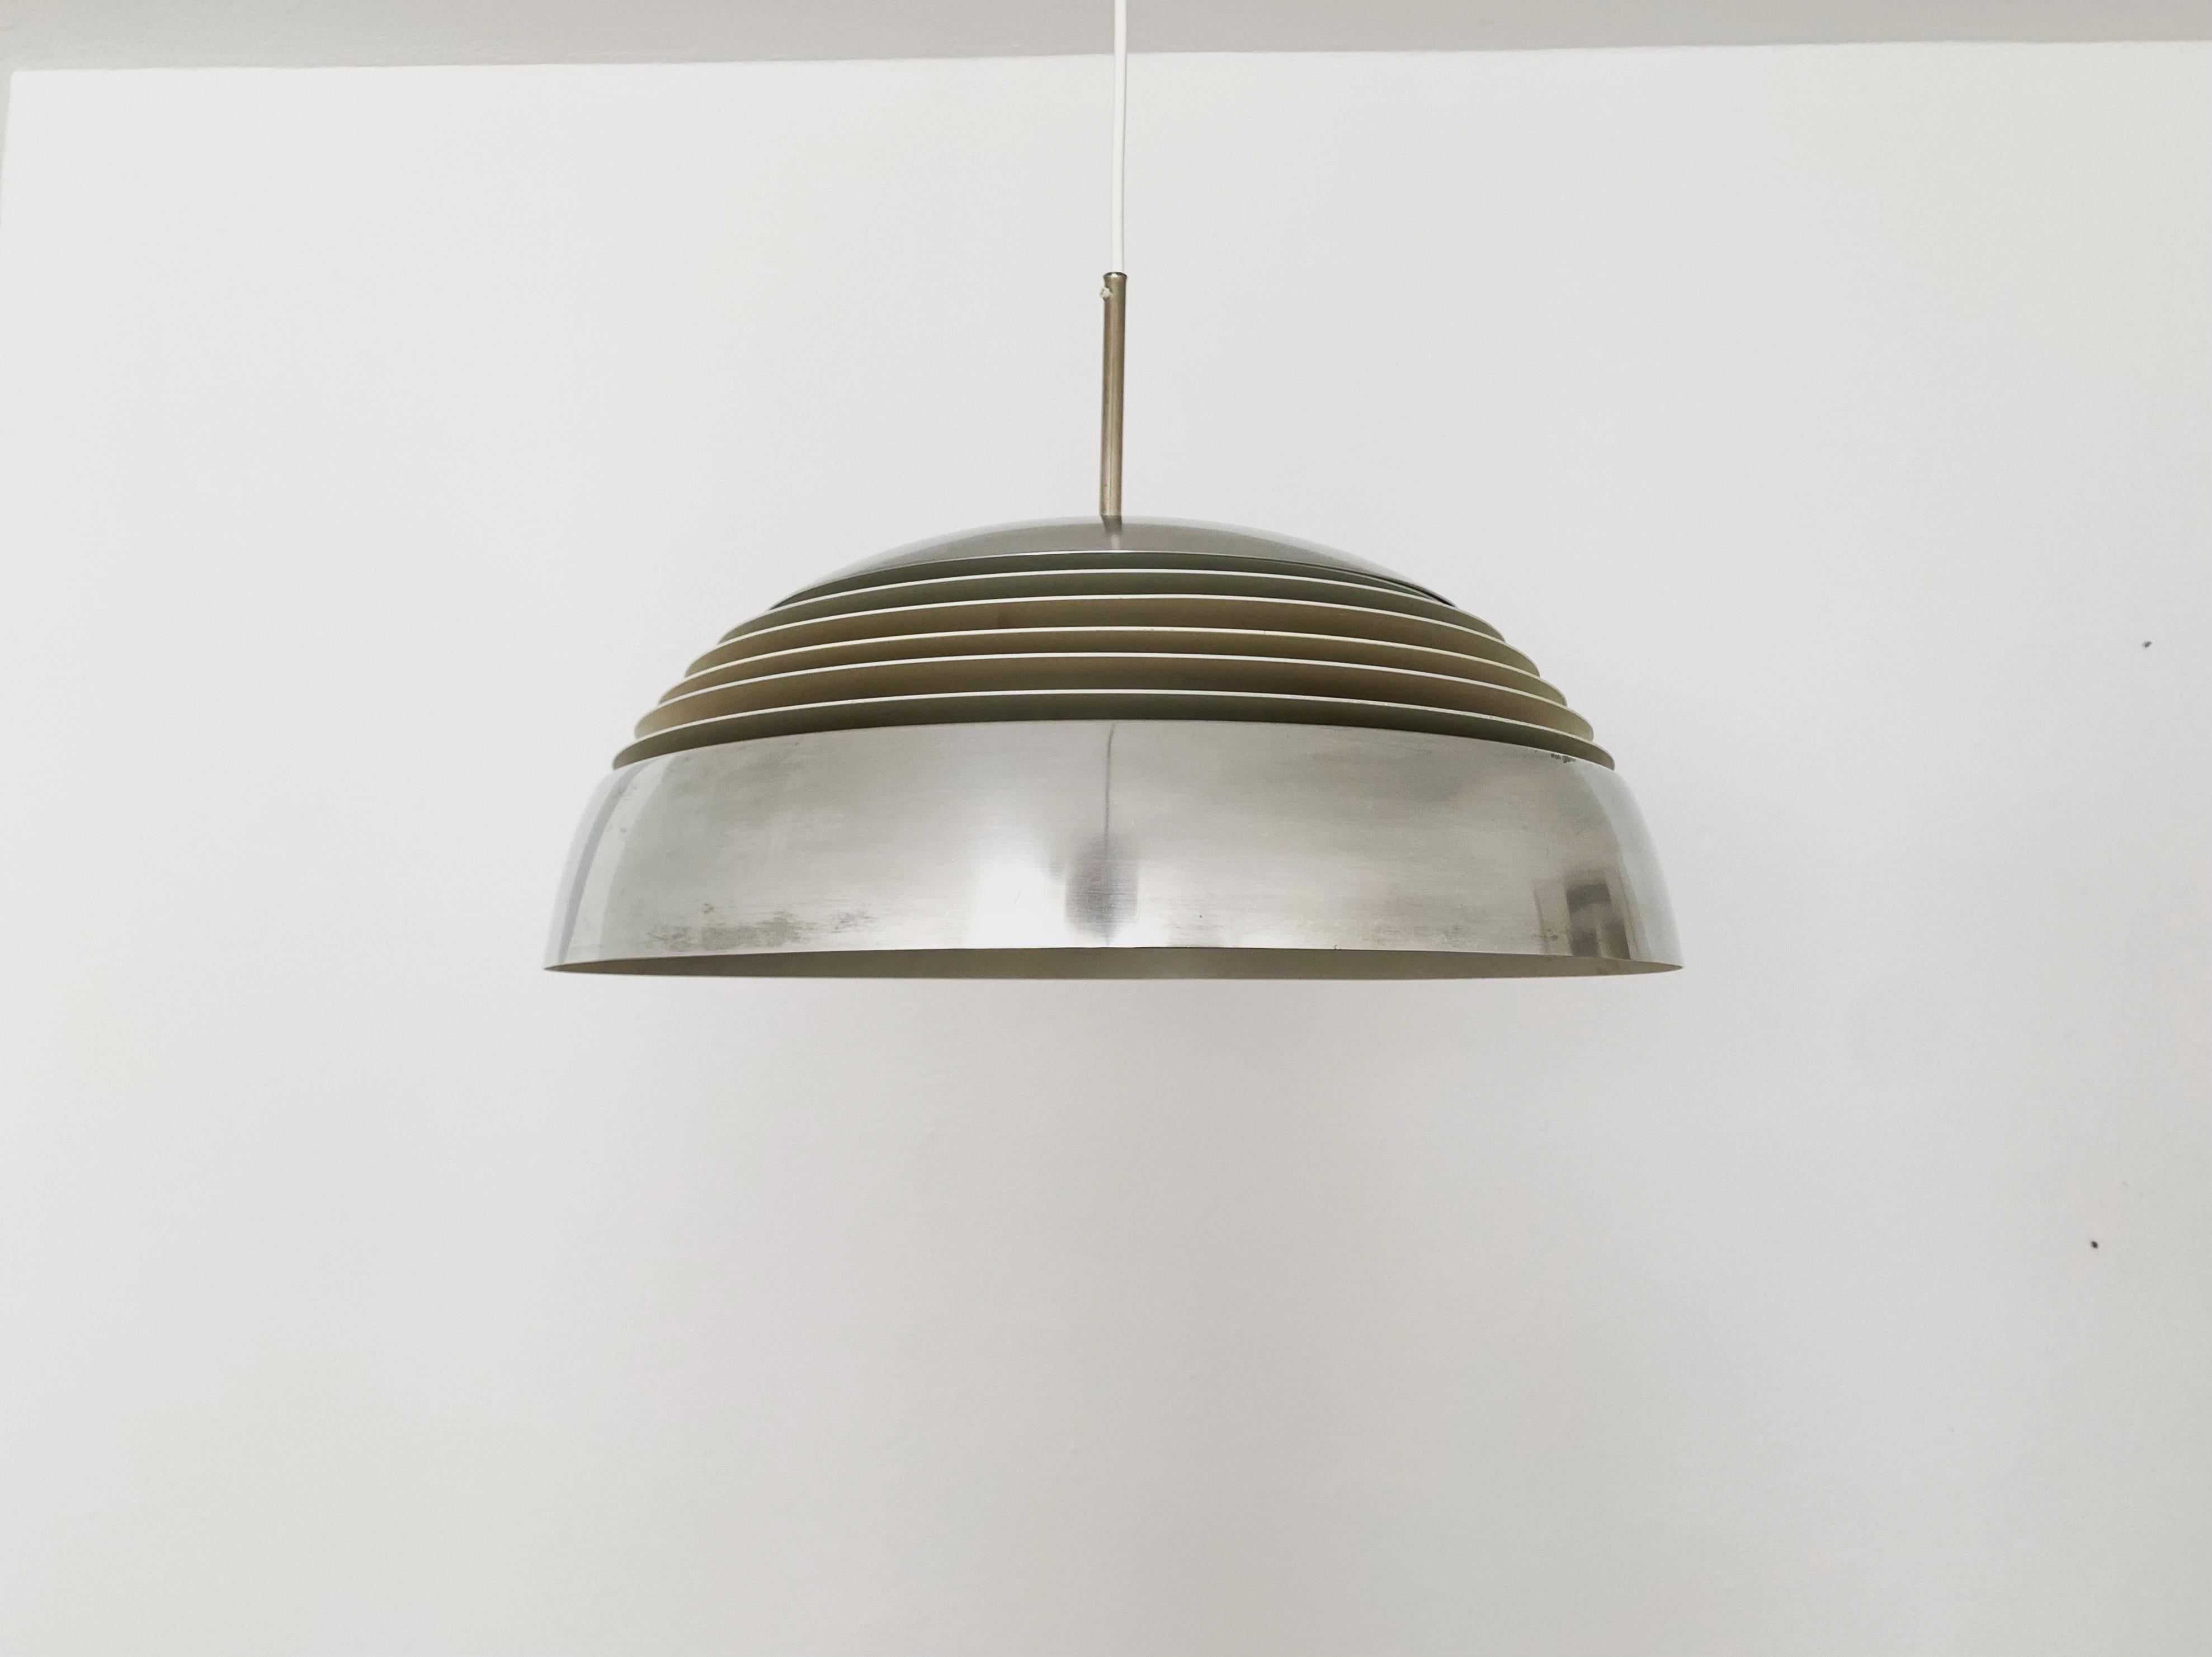 Impressive pendant lamp by Doria from the 1960s.
Extraordinarily beautiful design with a fantastic charisma.
The slats spread the light beautifully and create a warm and pleasant atmosphere.

Condition:

Good vintage condition with slight signs of